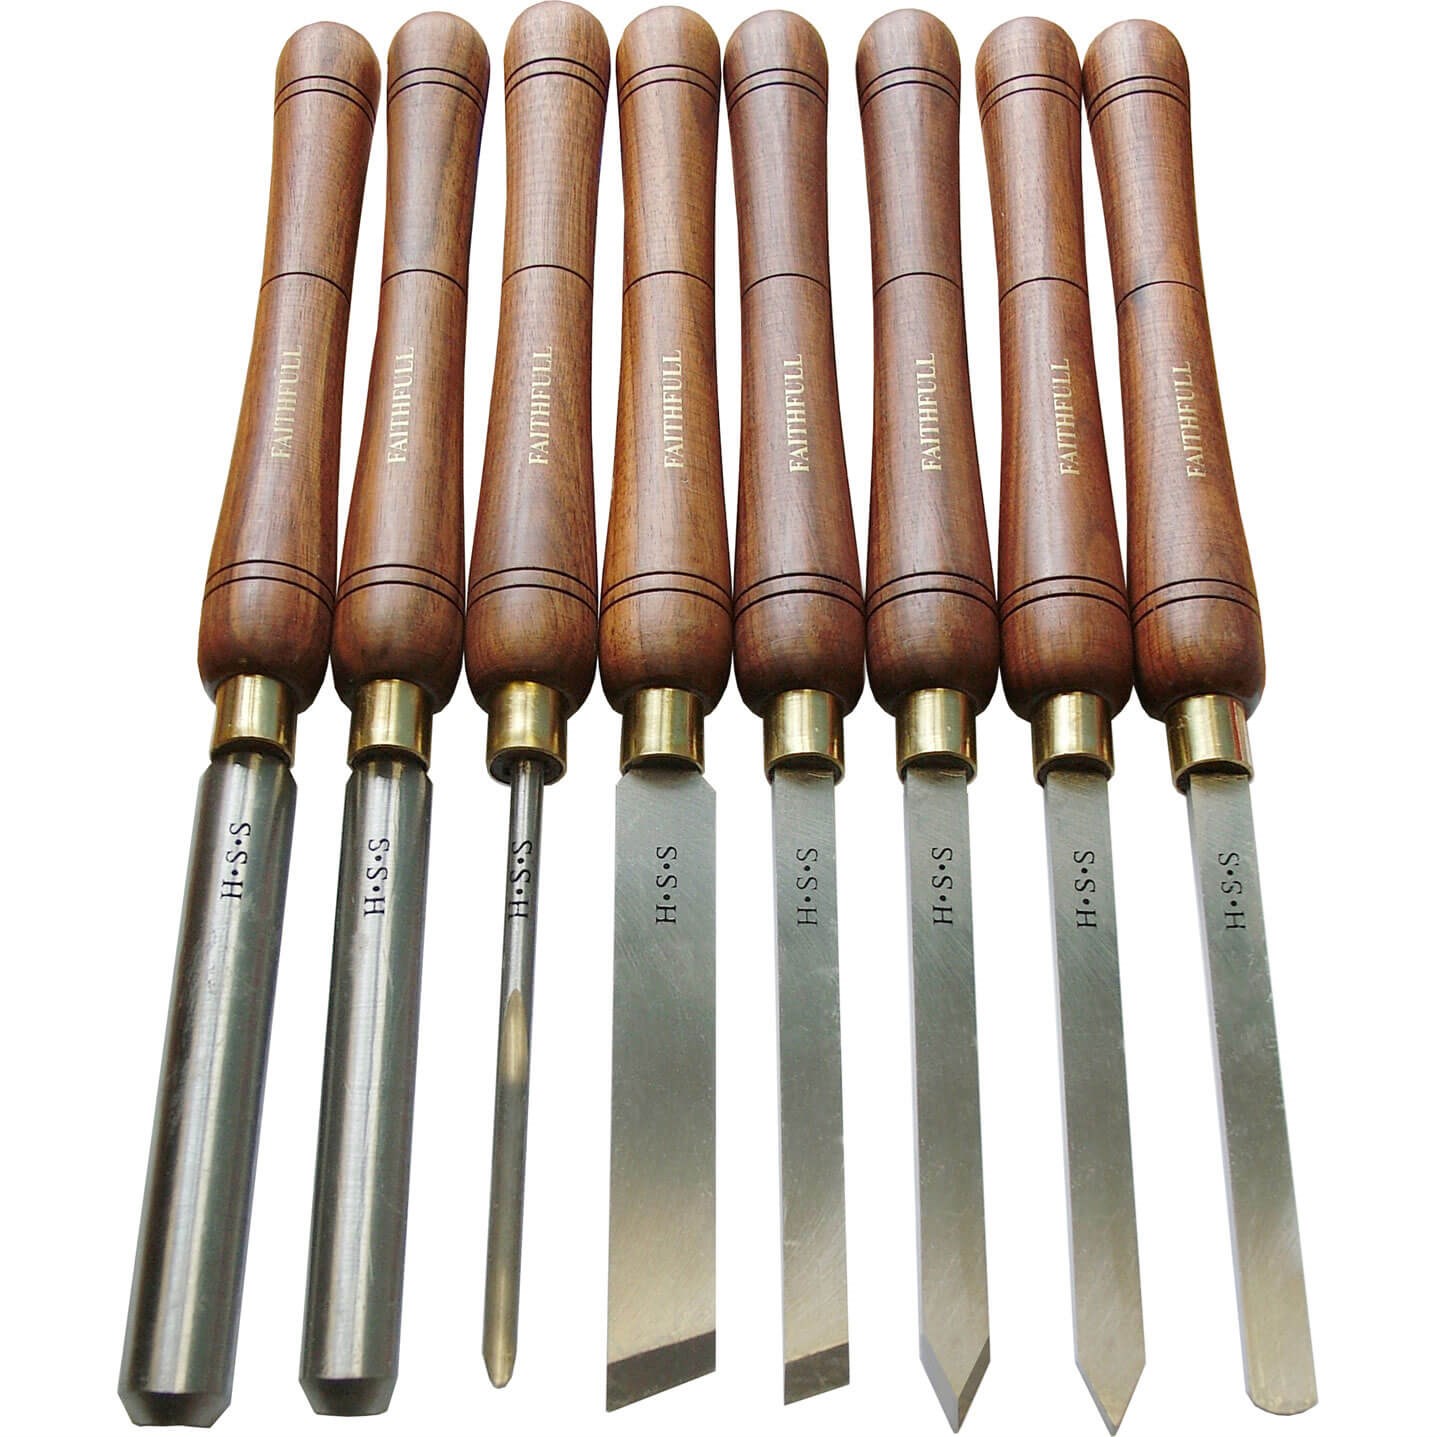 Wood Lathe Chisel Set Woodworking Turning Tools Cutting Carving HSS Steel  Blades